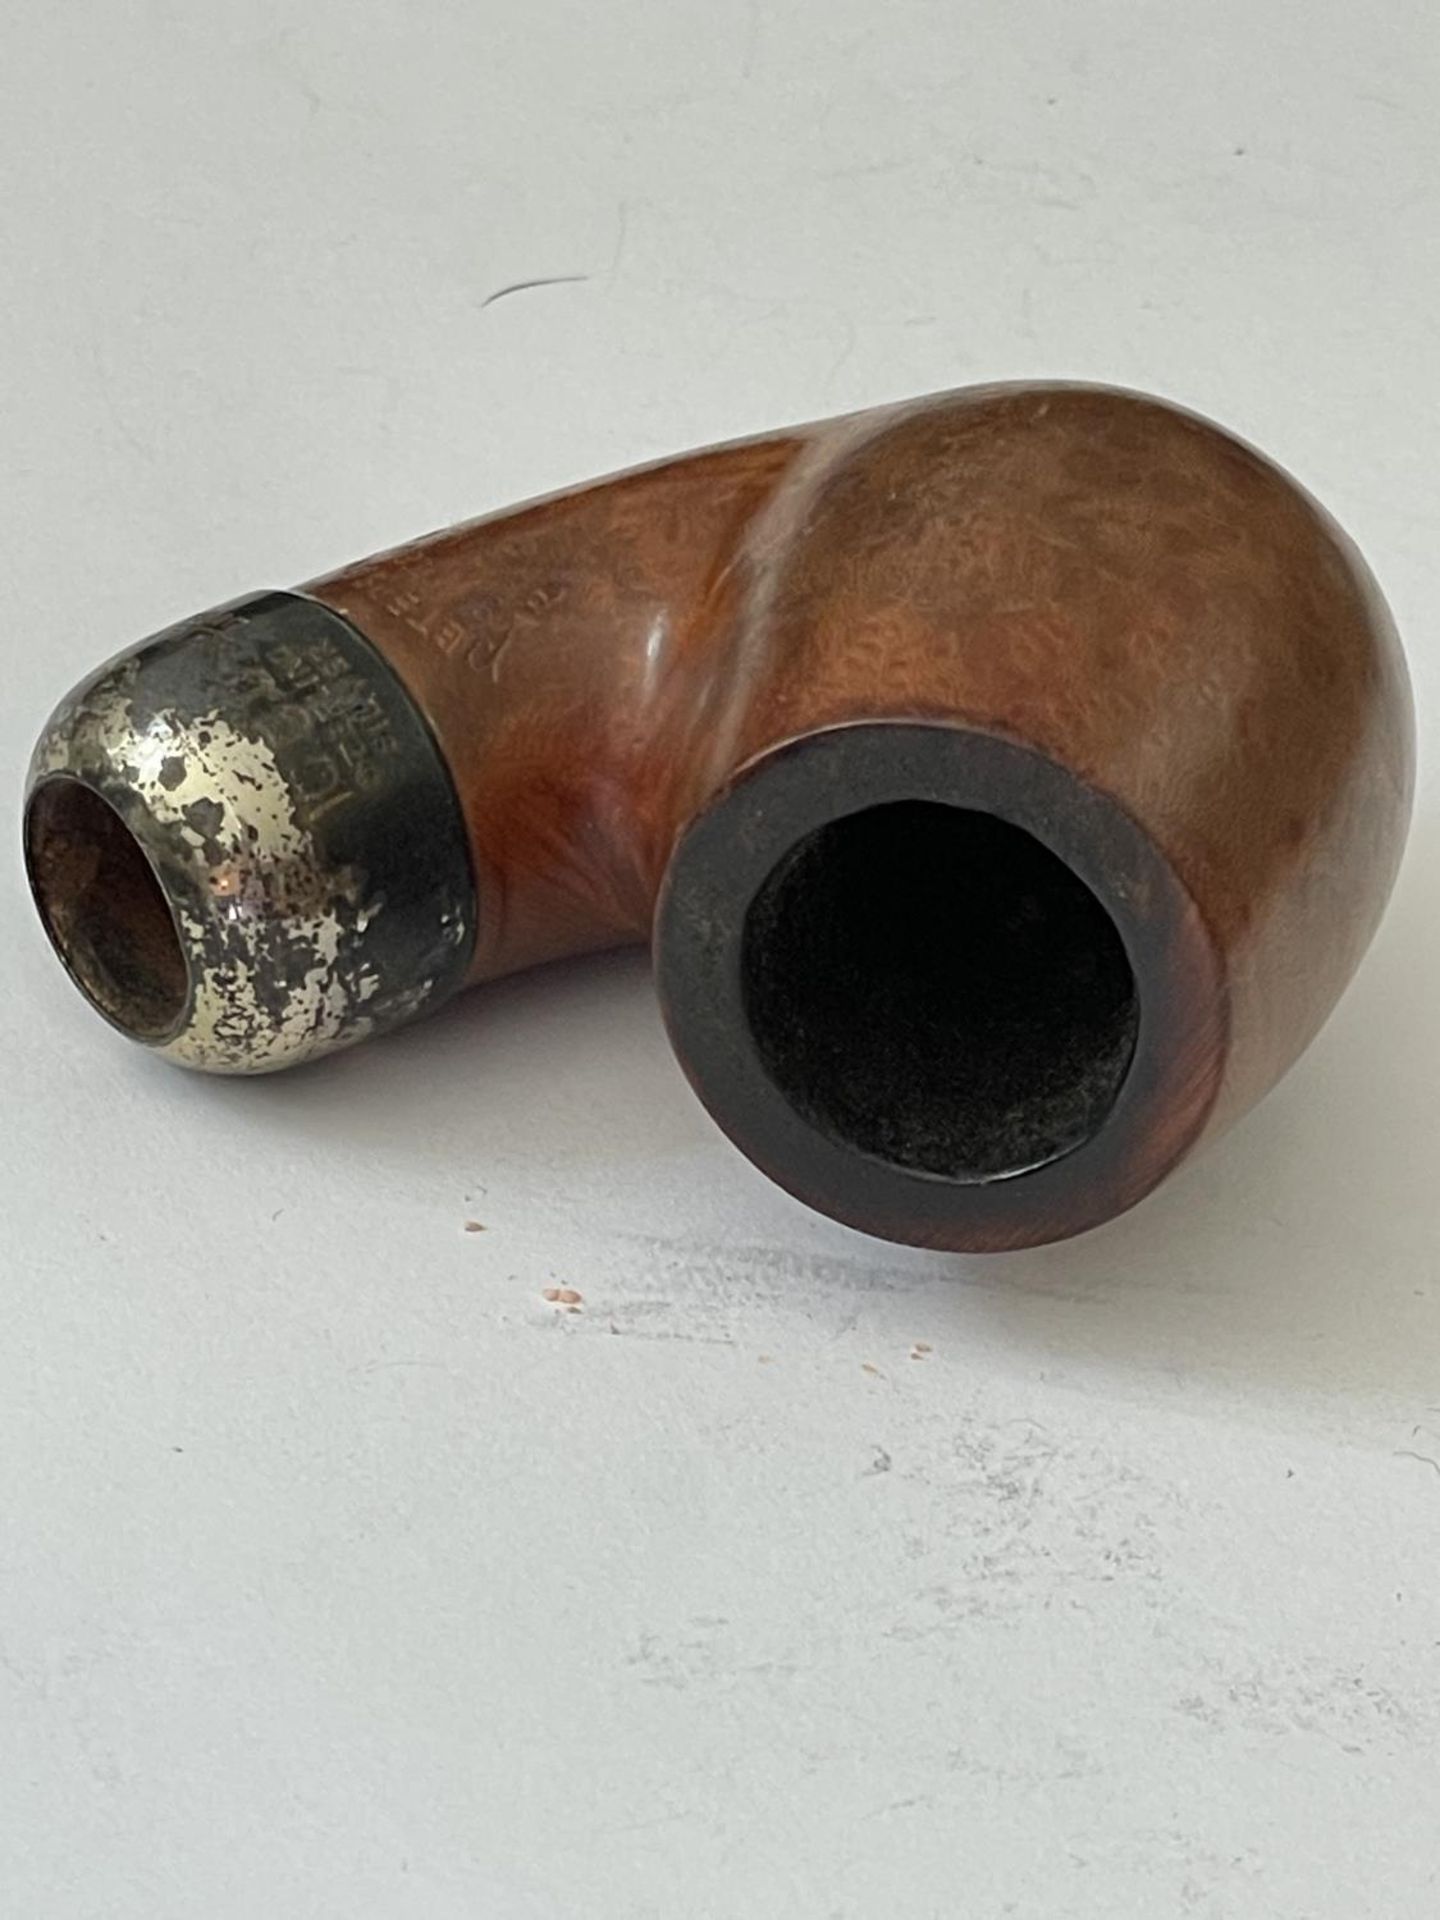 A PETERSONS SYSTEM PREMIER 317 PIPE BASE DUBLIN WITH STERLING SILVER COLLAR - Image 4 of 4